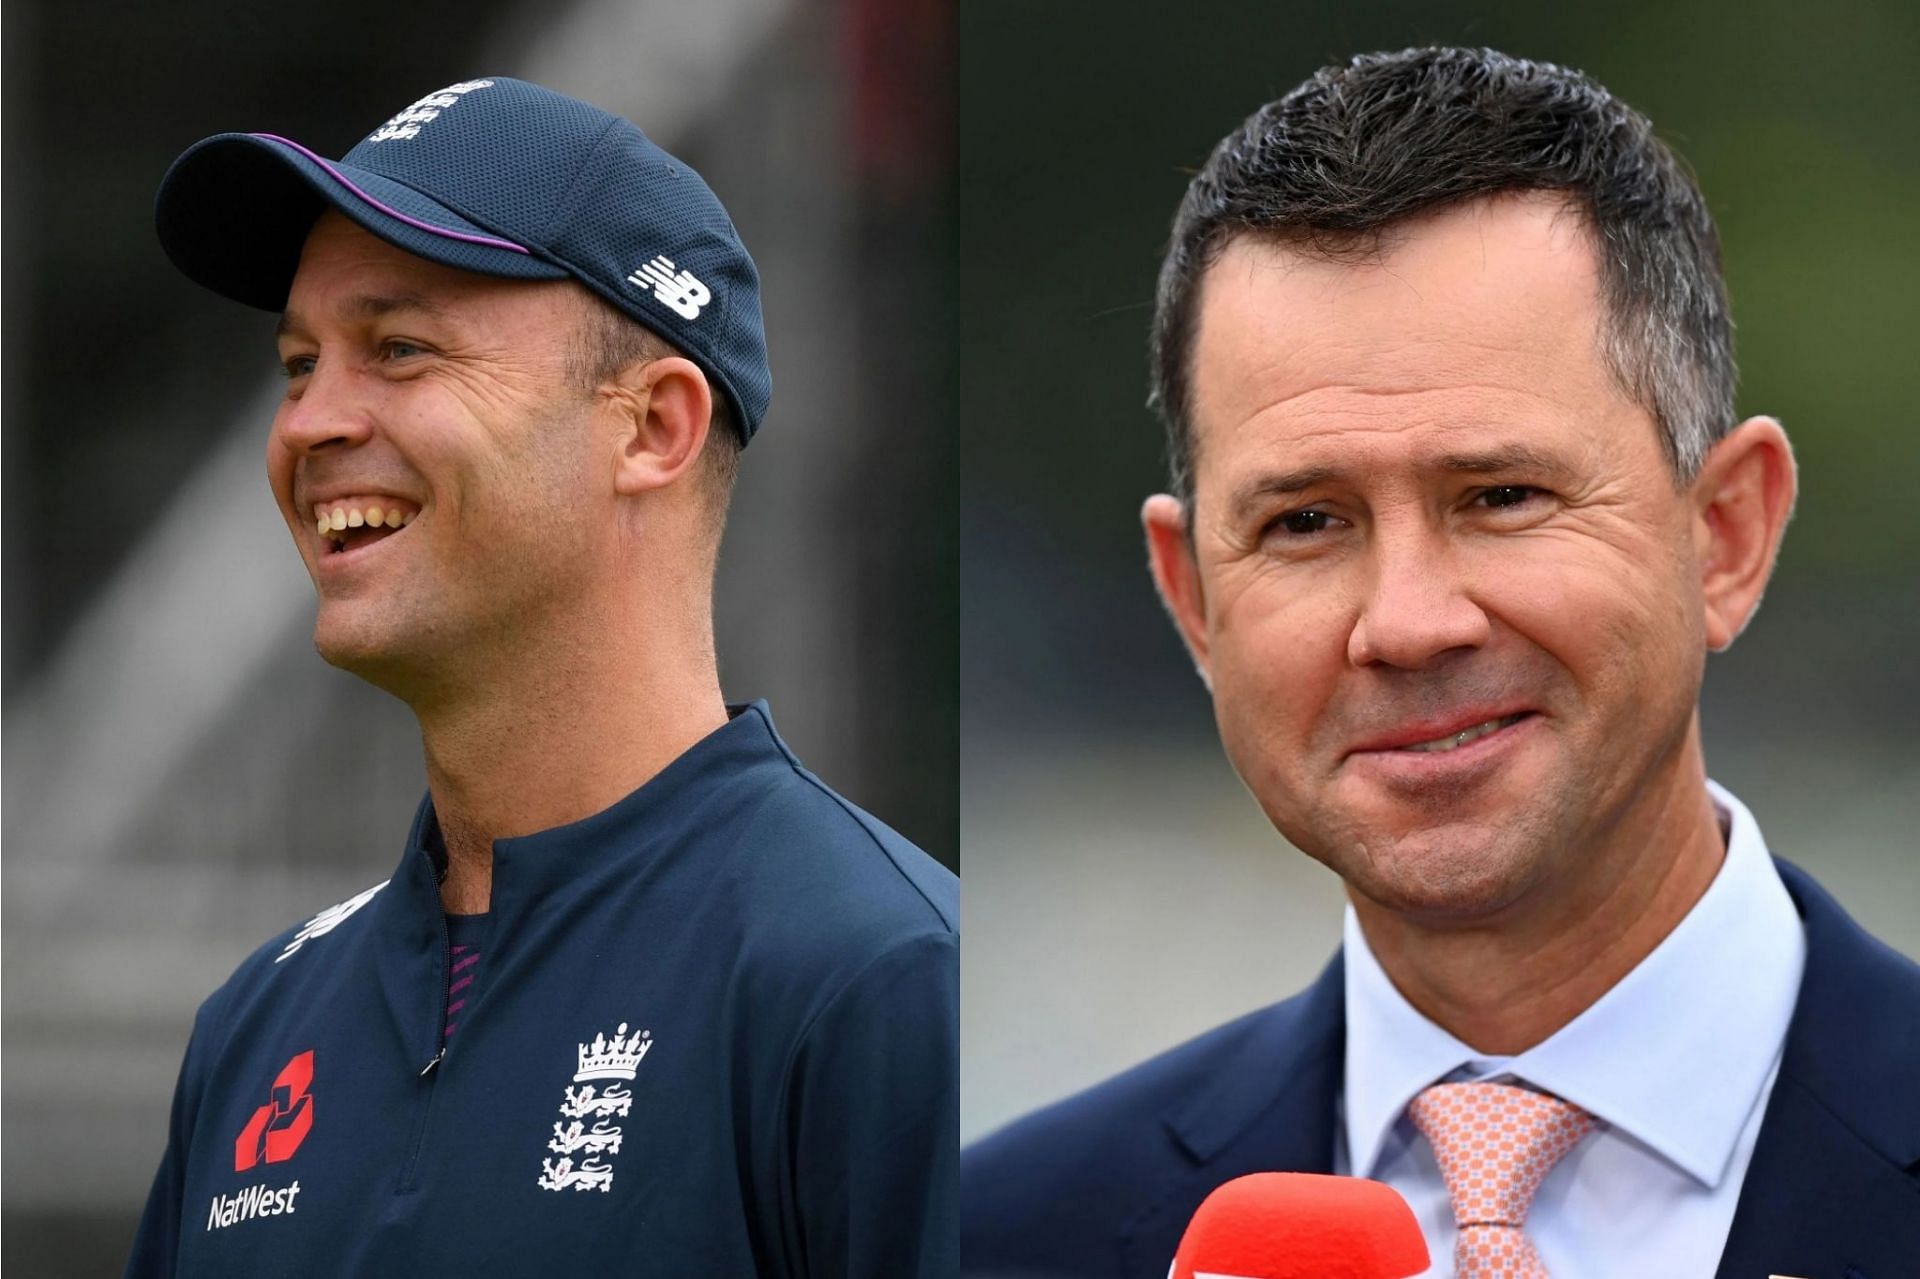 Both Jonathan Trott (L) and Ricky Ponting (R) have contributed massively for their respective nations.